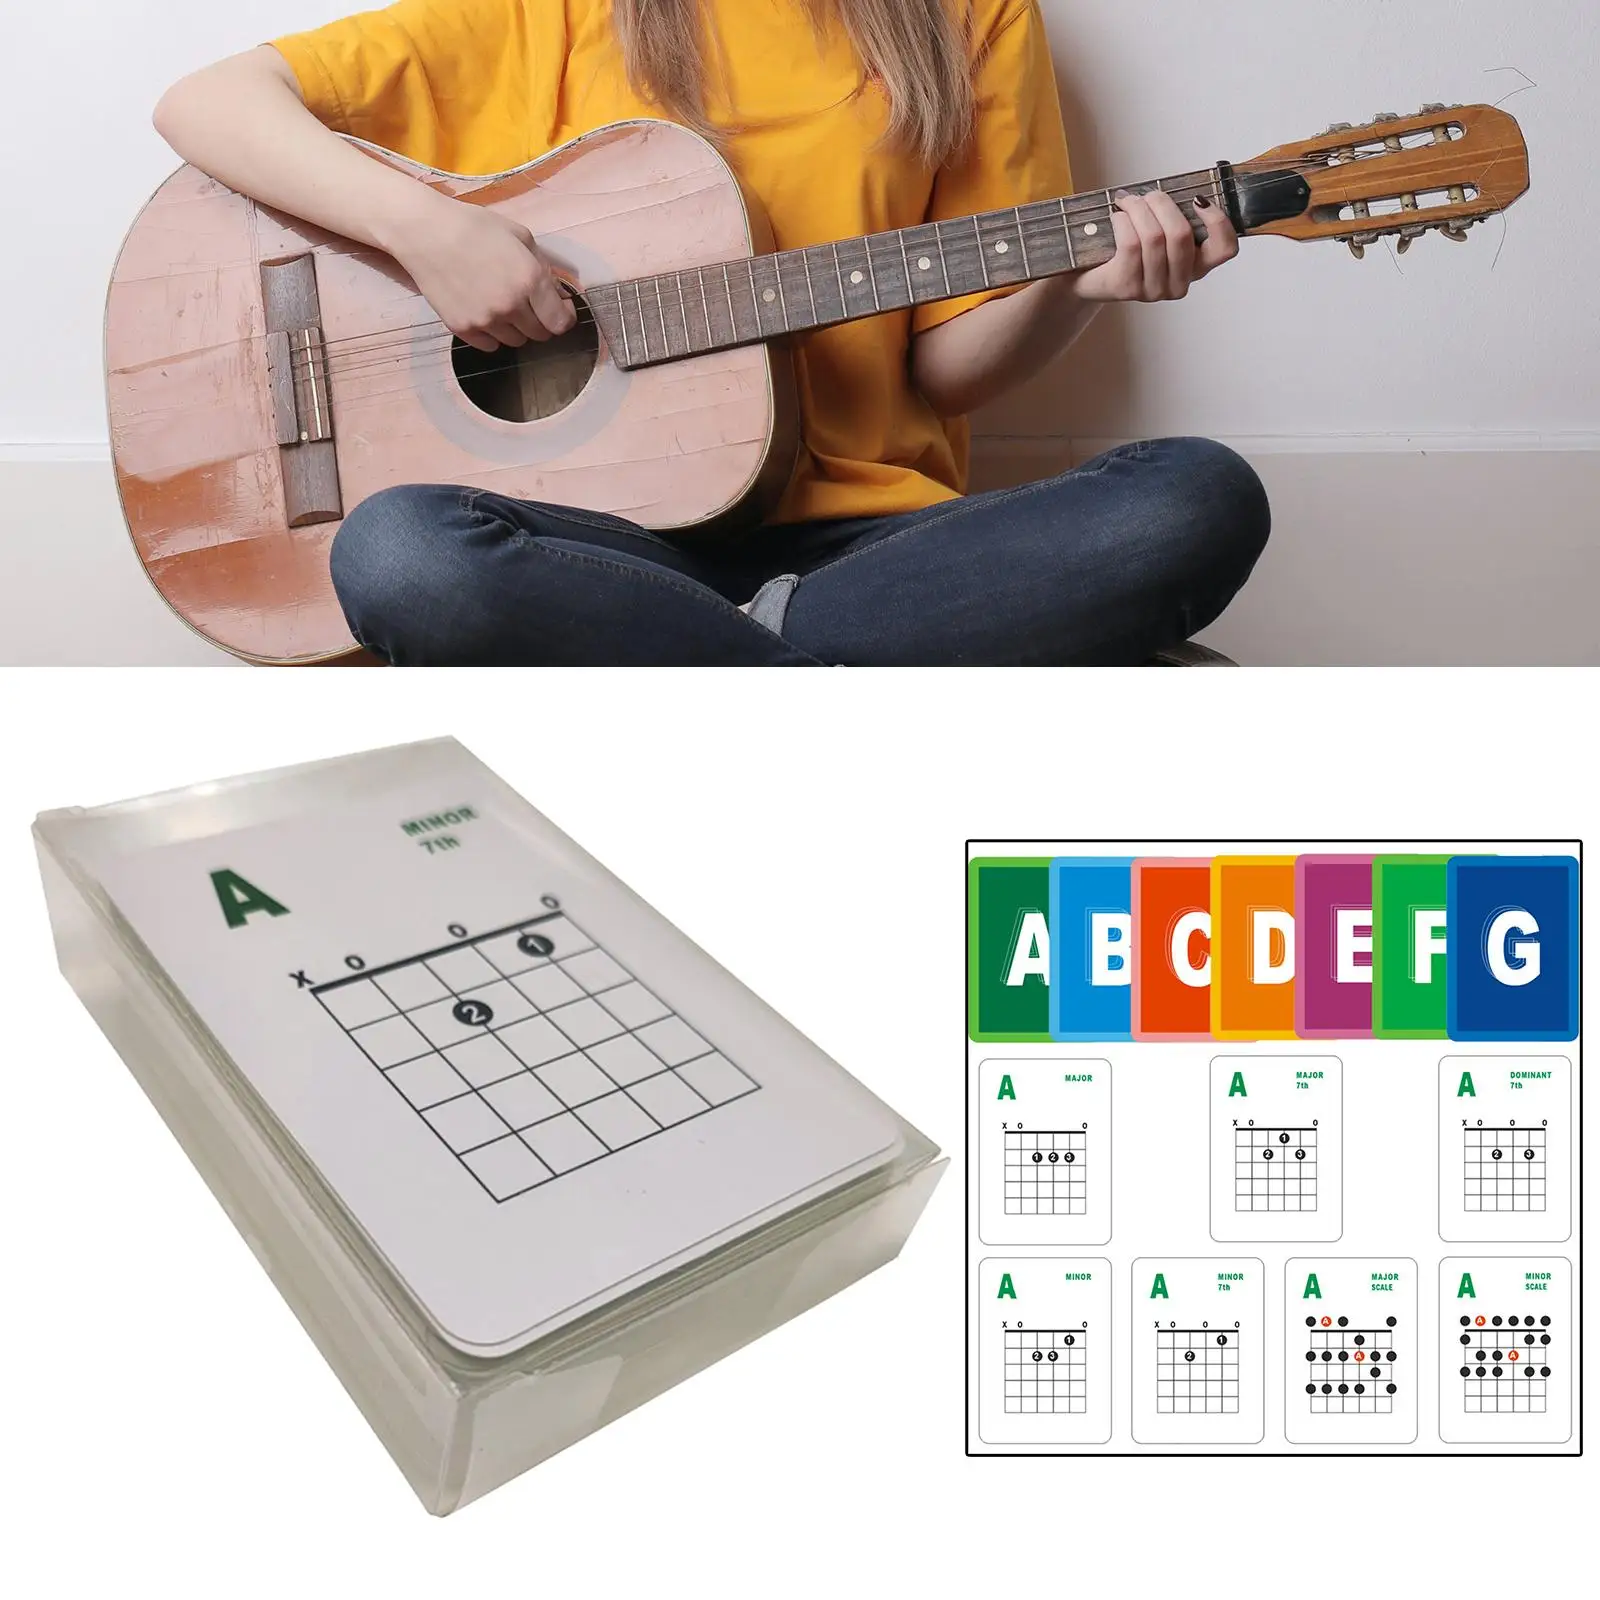 49x Guitar Chords Card Waterproof A to G Beginners Acoustic and Electric Guitar Learn Teach